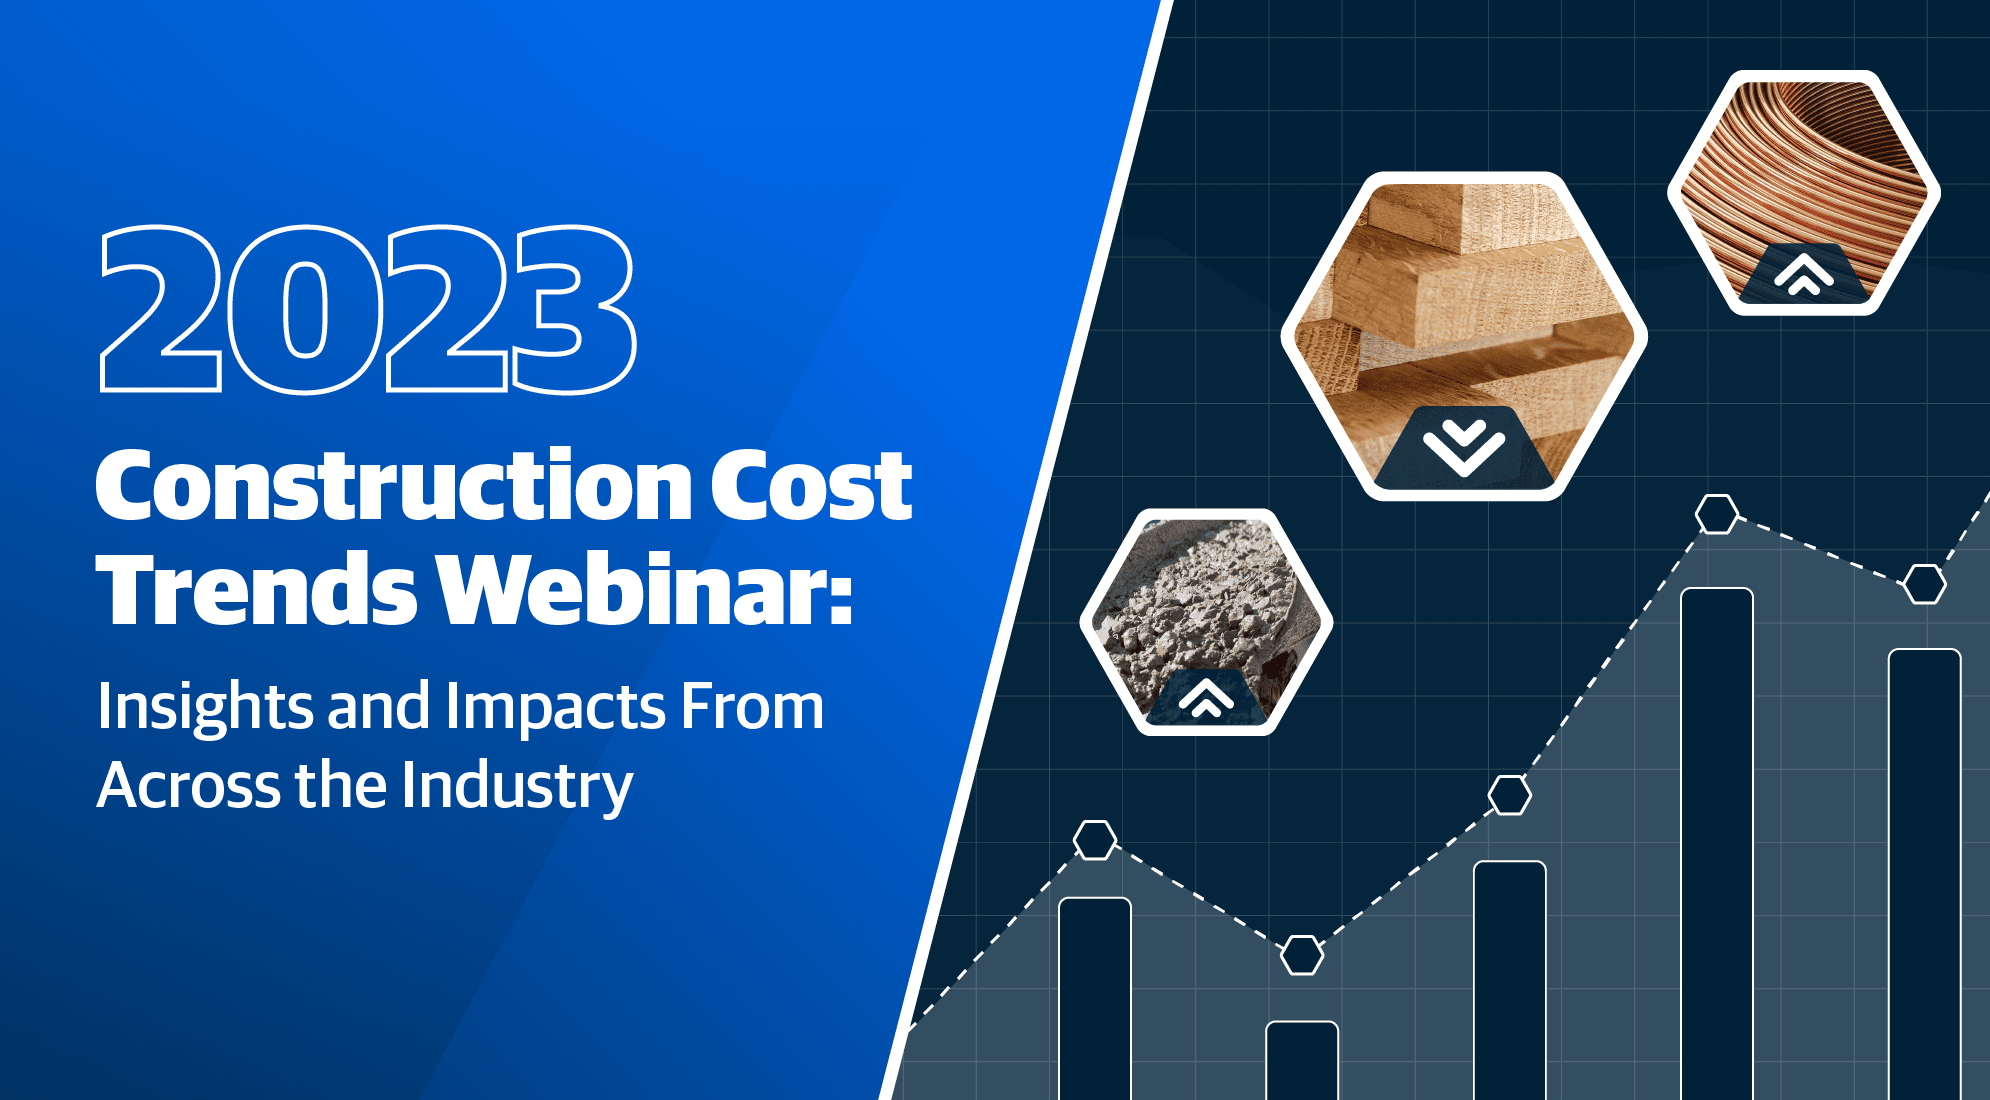 2023 Construction Cost Trends: Insights and Impacts from Across the Industry 4